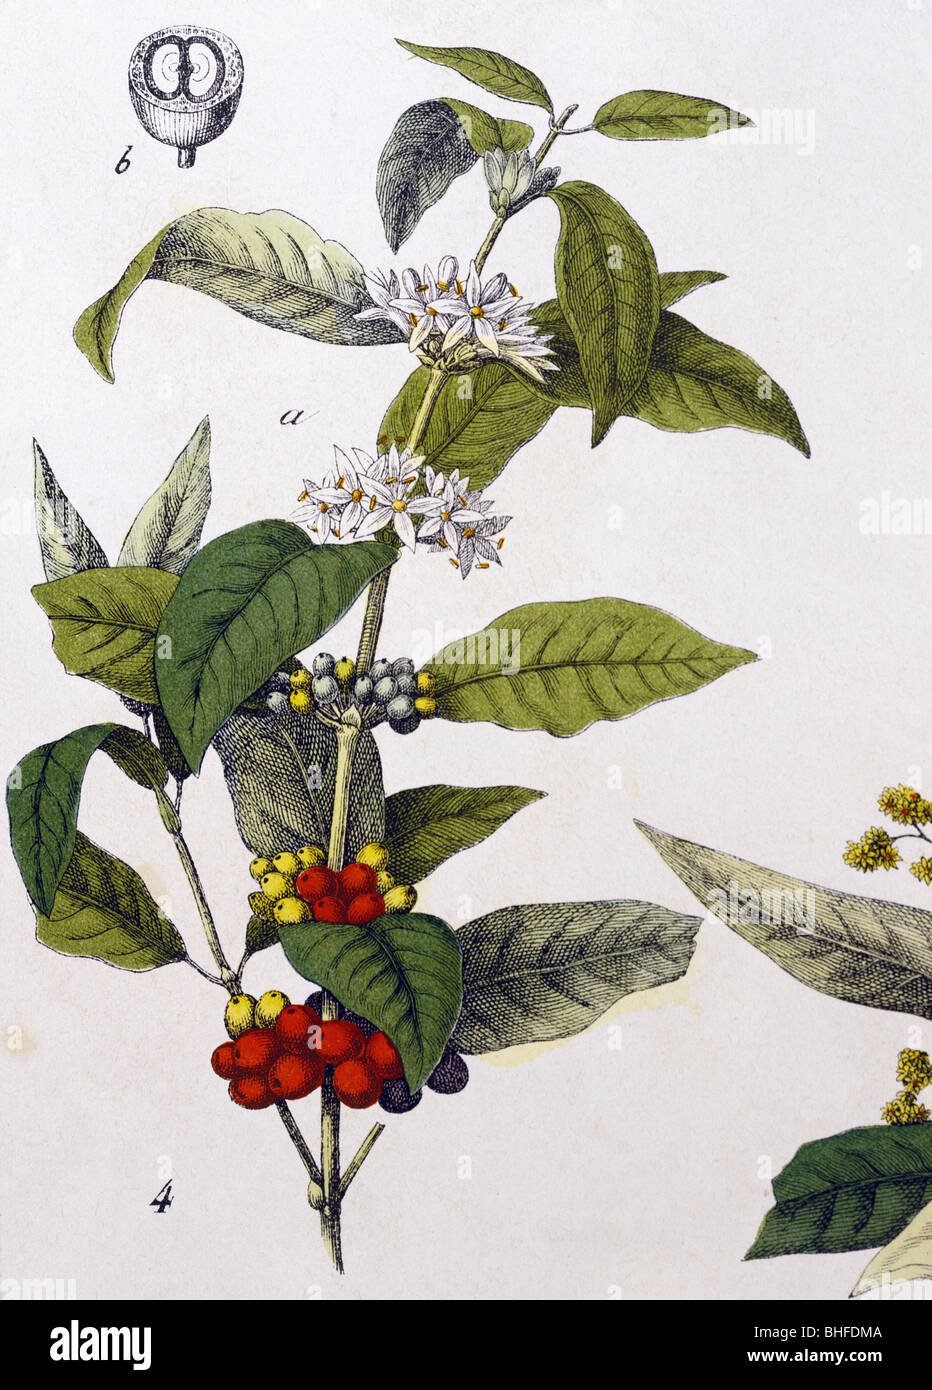 botany, Coffea, Arabica coffee (Coffea arabica), twig with blossoms and fruits, from 'Naturgeschichte des Pflanzenreichs' (Natural history of the kingdom of plants), Esslingen, Germany, 1869, private collection, Stock Photo